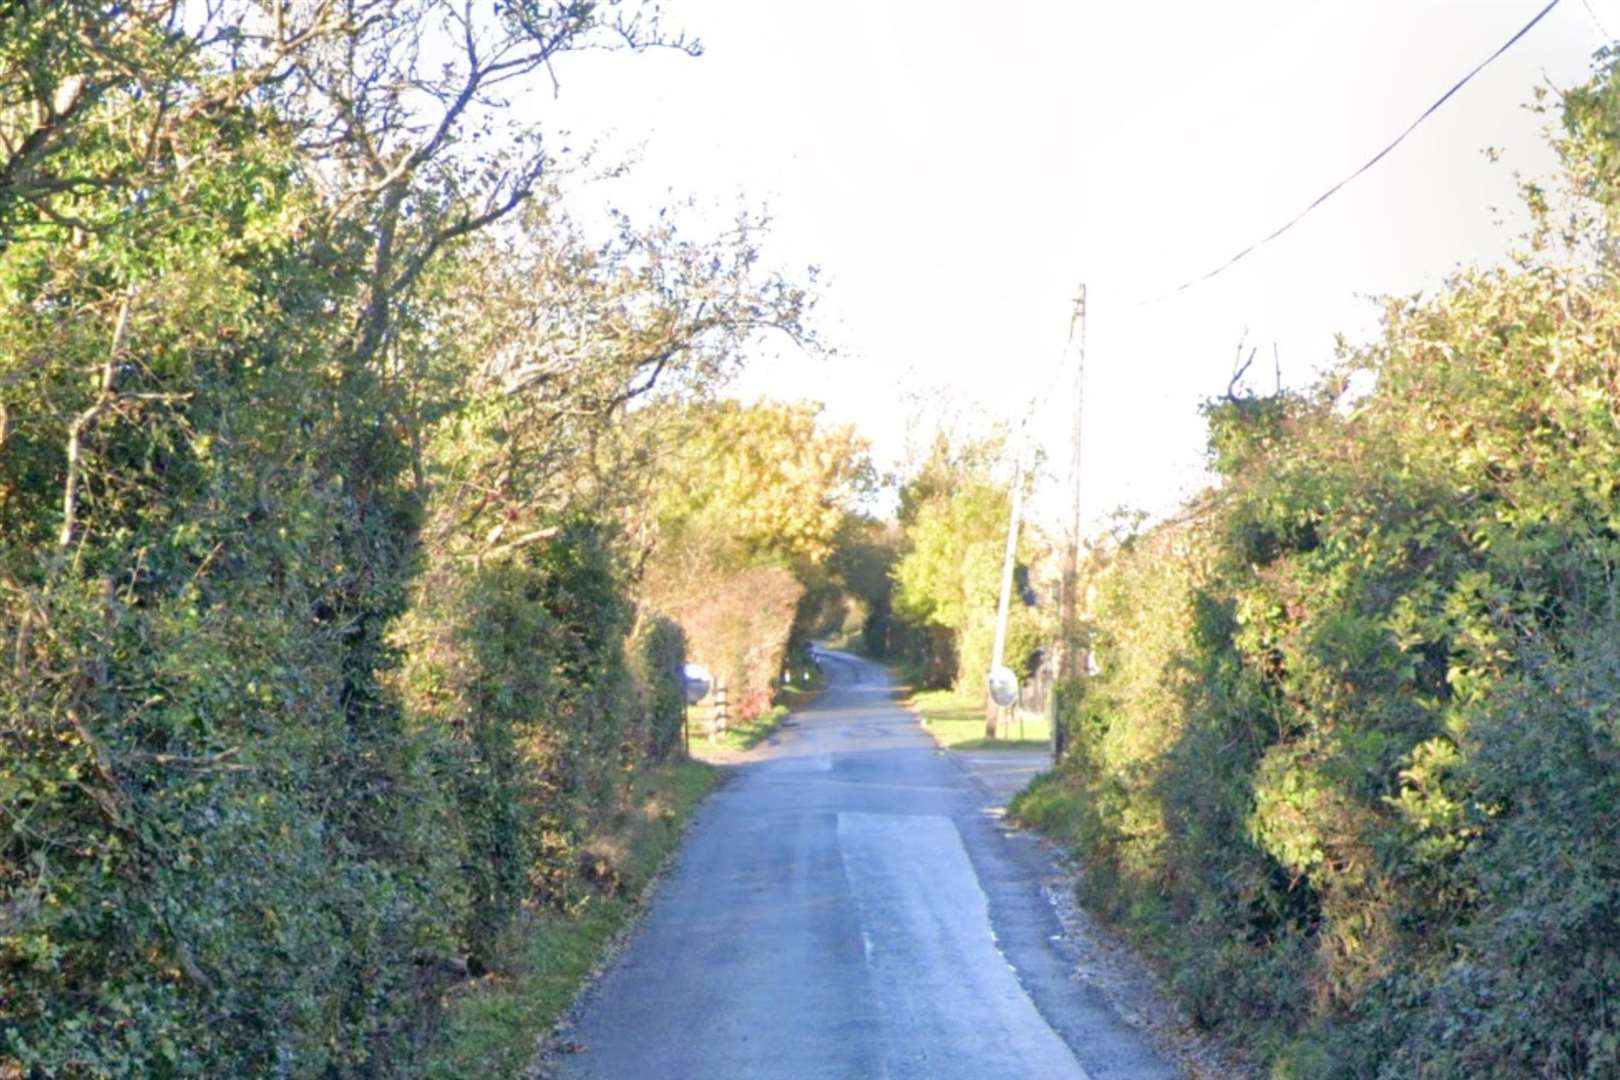 Police were called to an address in Hernhill, near Faversham. Stock picture: Google Street View